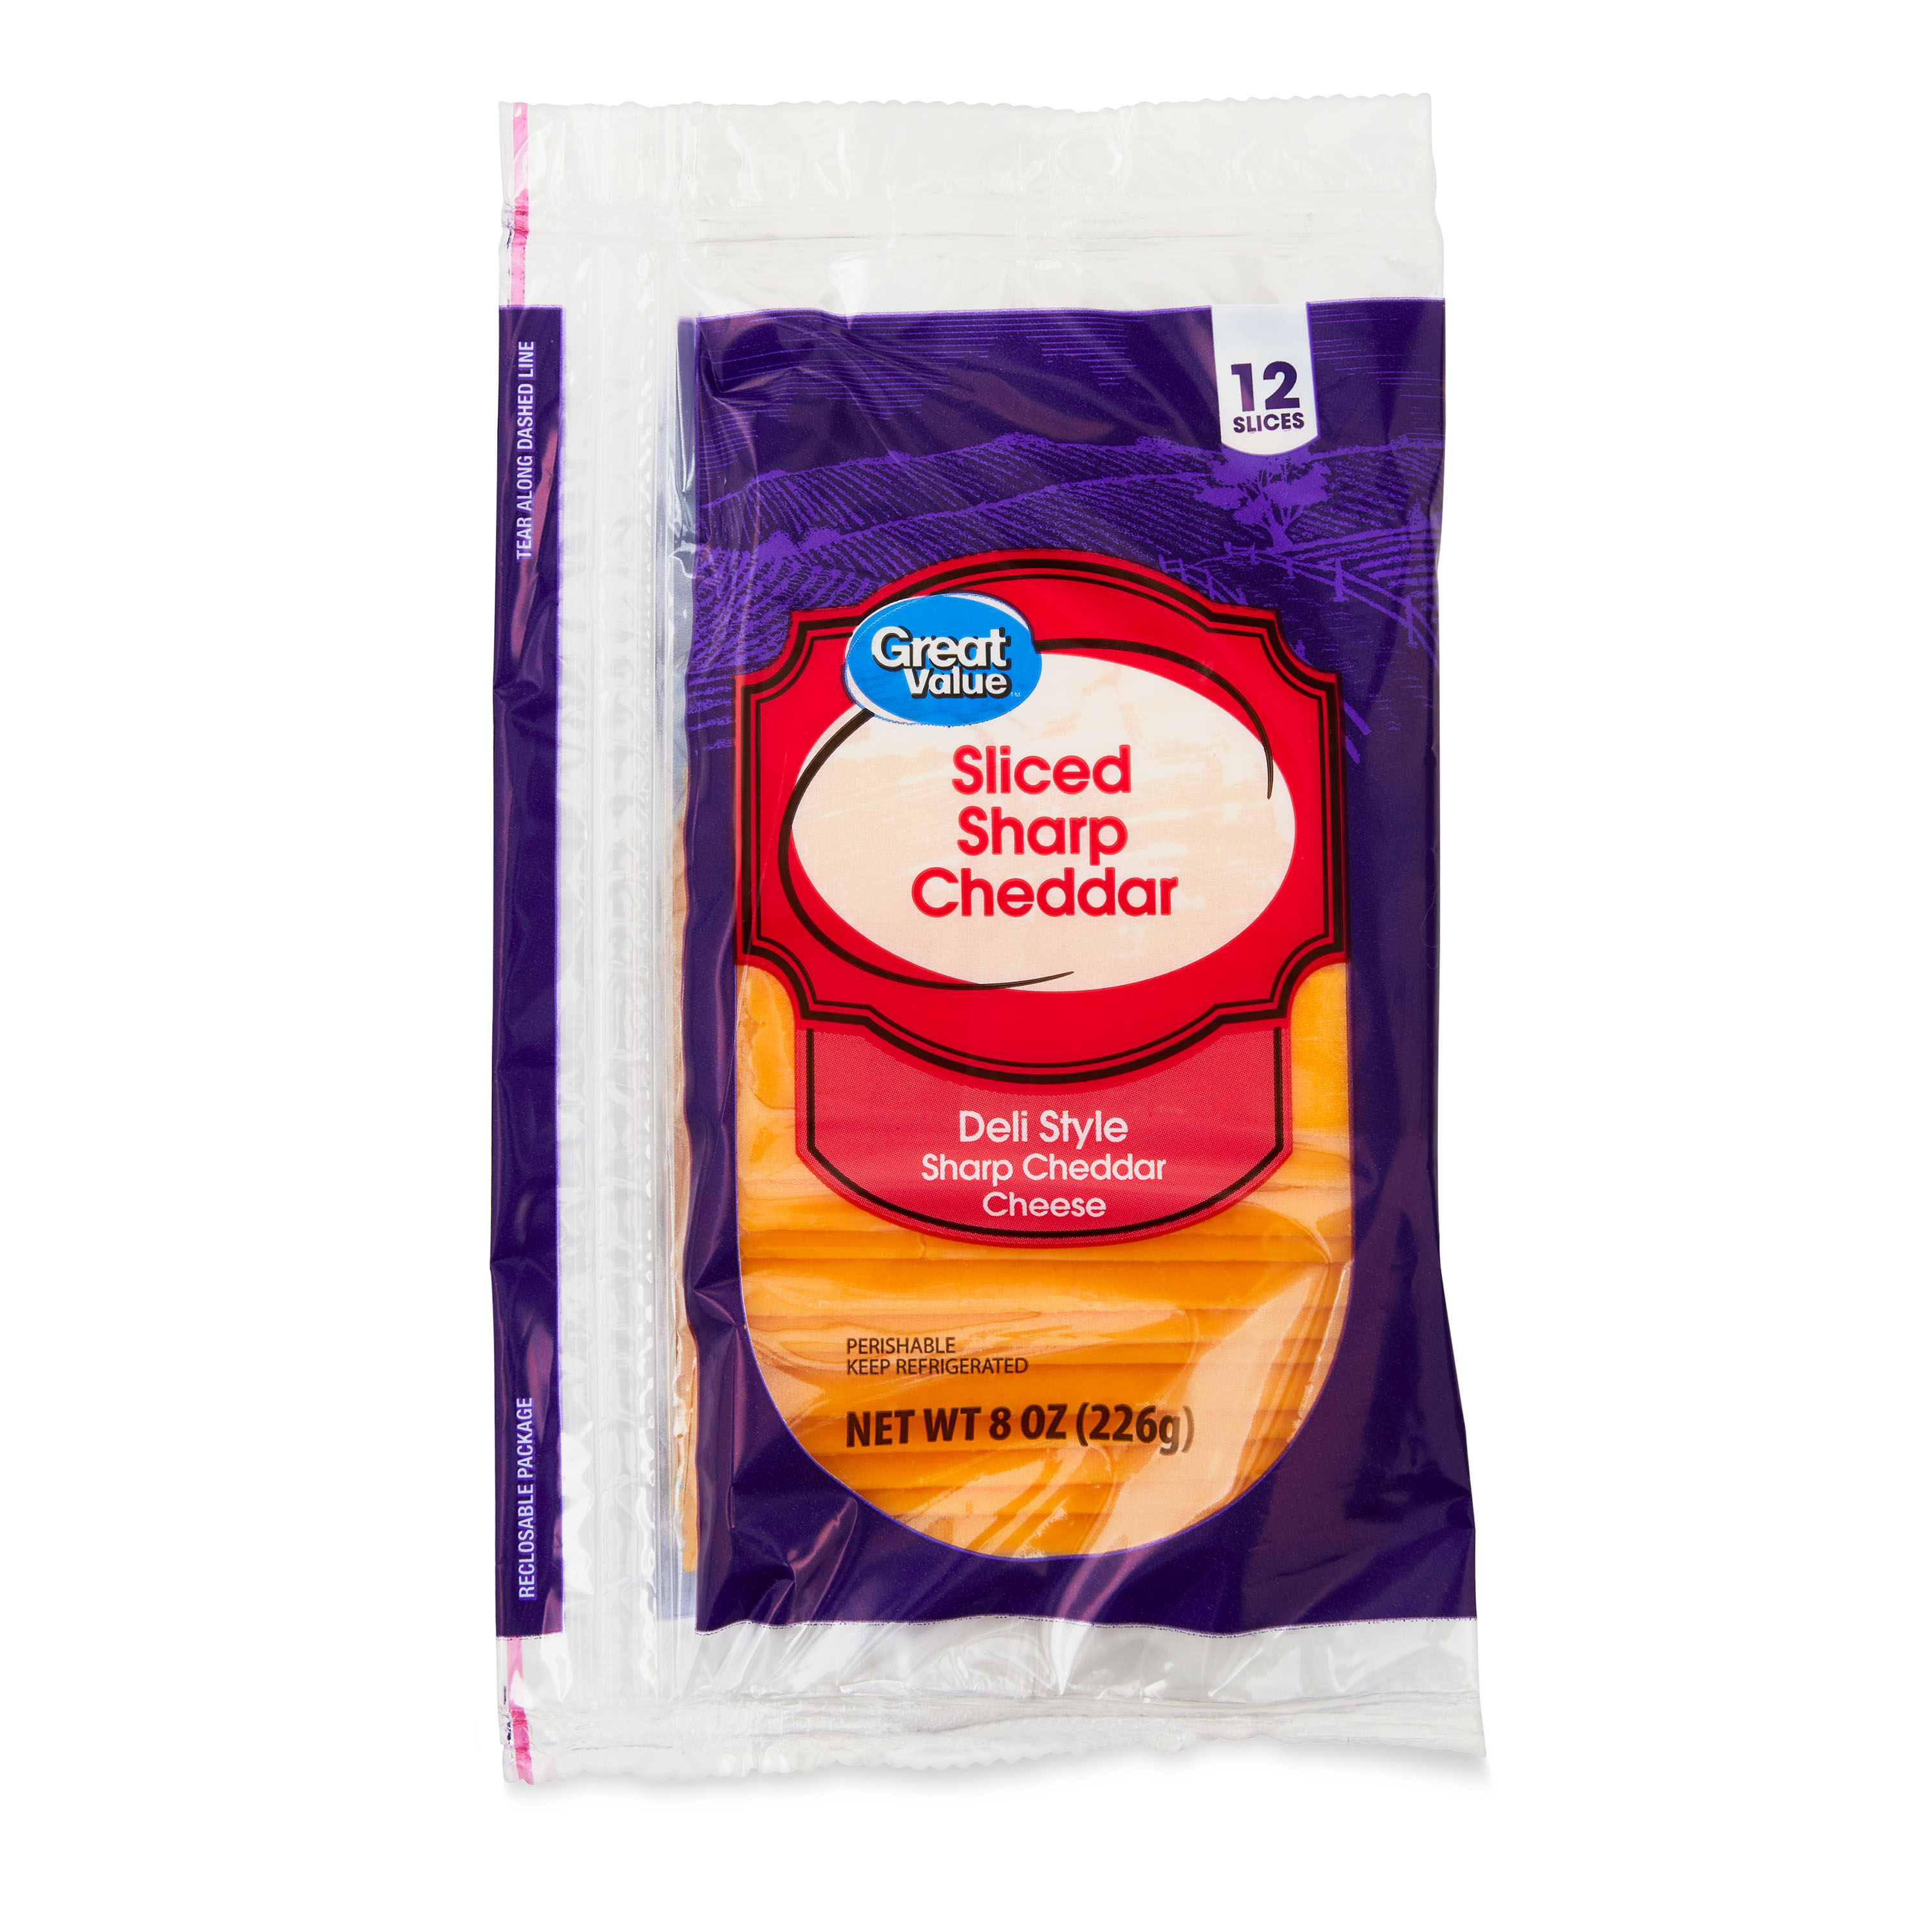 Great Value Deli Style Sliced Sharp Cheddar Cheese, 8 oz, 12 Slices - image 1 of 7